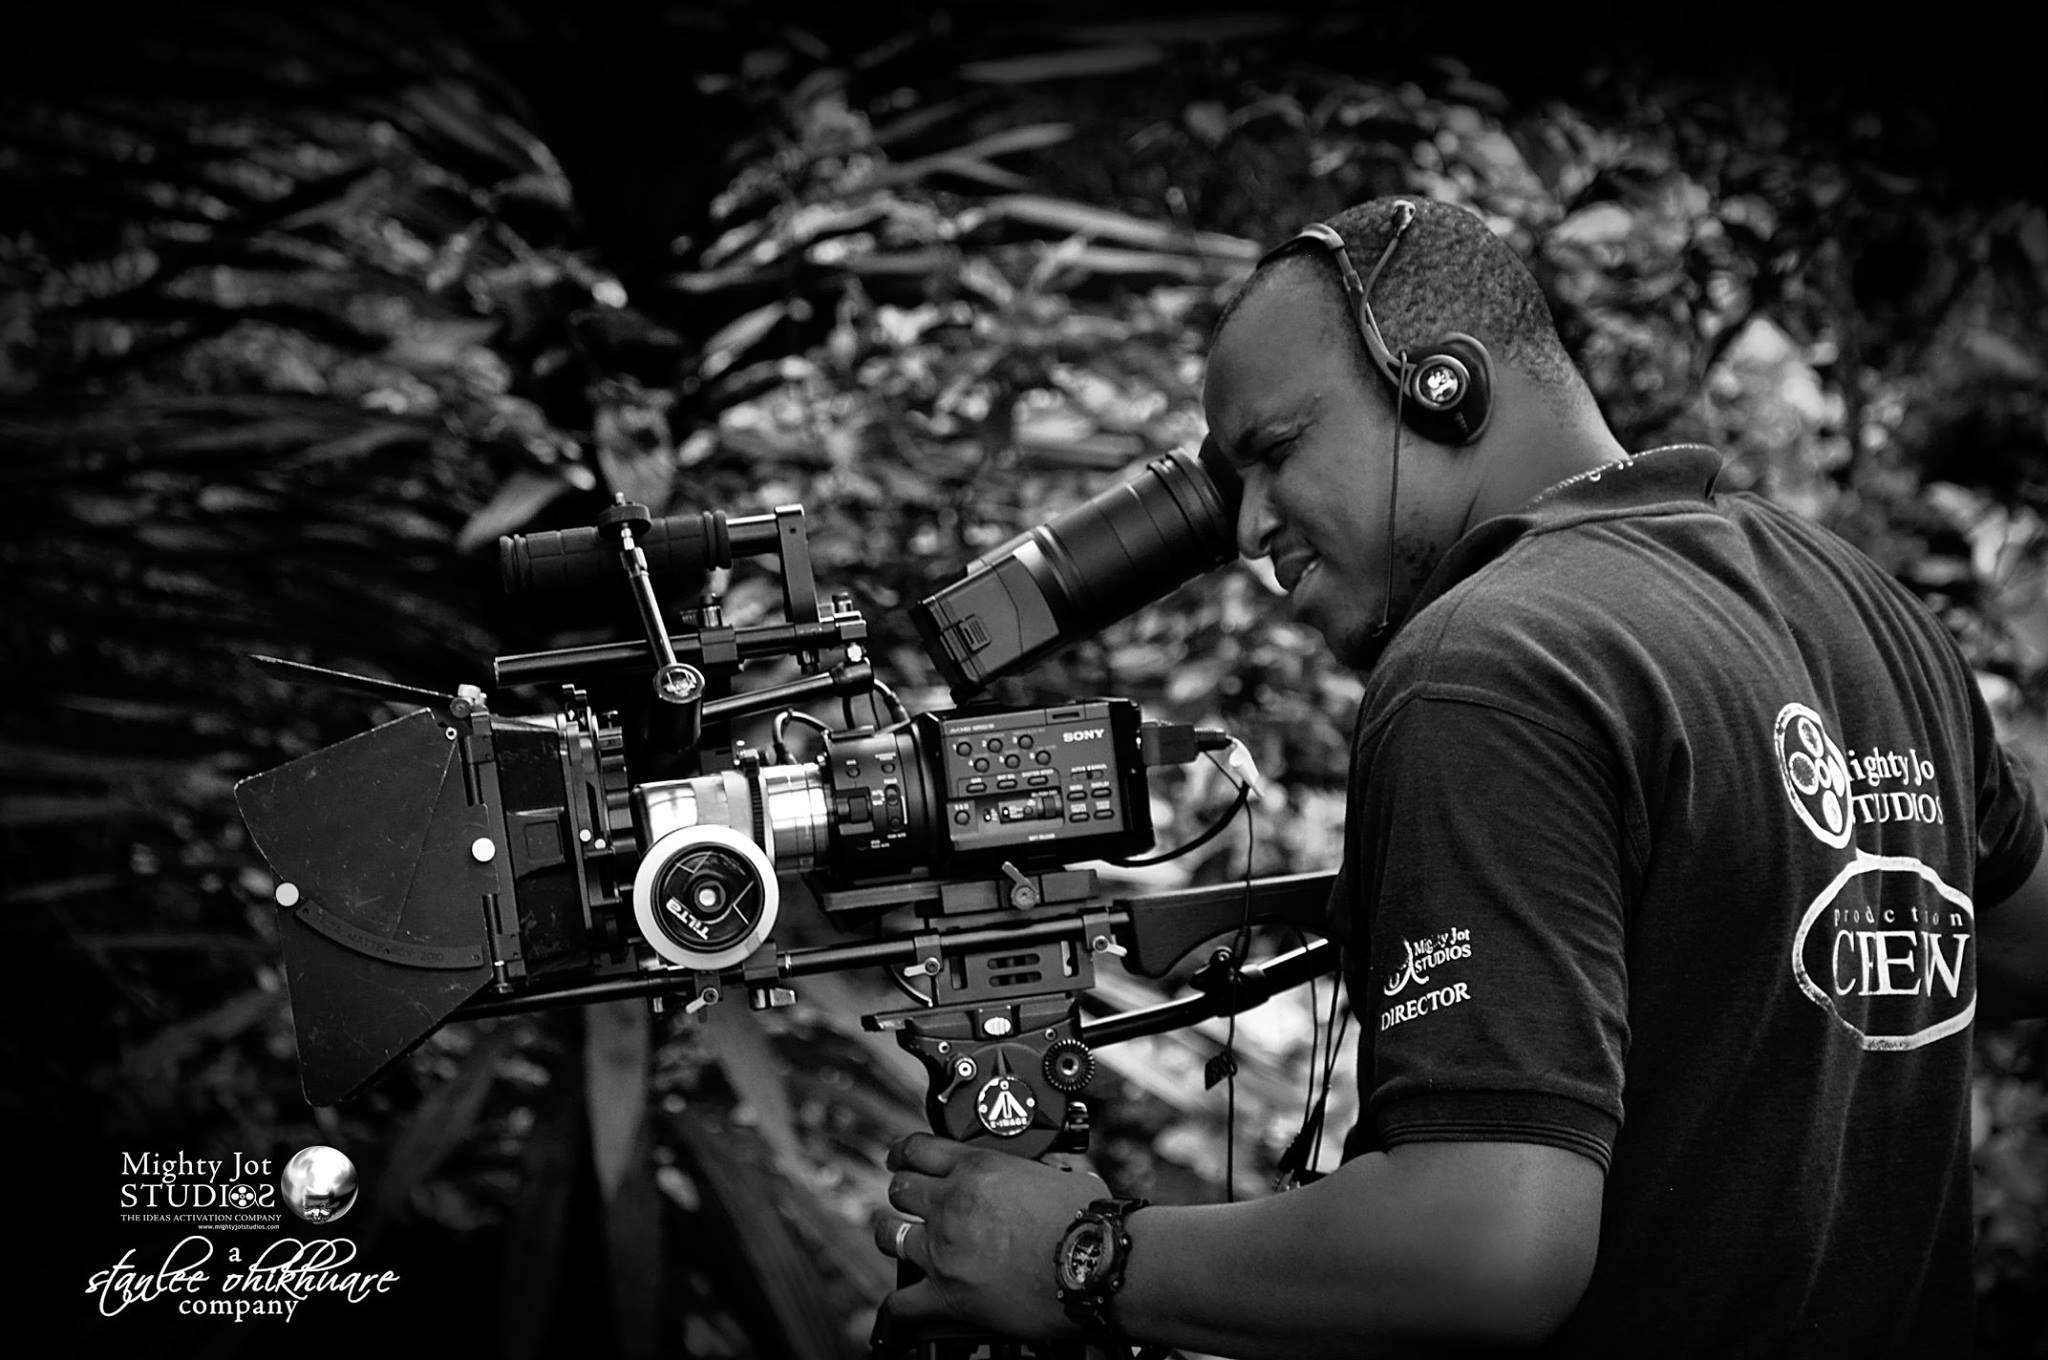 Stanlee Ohikhuare's Career as a CINEMATOGRAPHER has been accompanied with his in depth understanding of the use of SONY'S NEX Cameras. All of Stanlee's movies have been shot with the SONY NEX range of Cameras